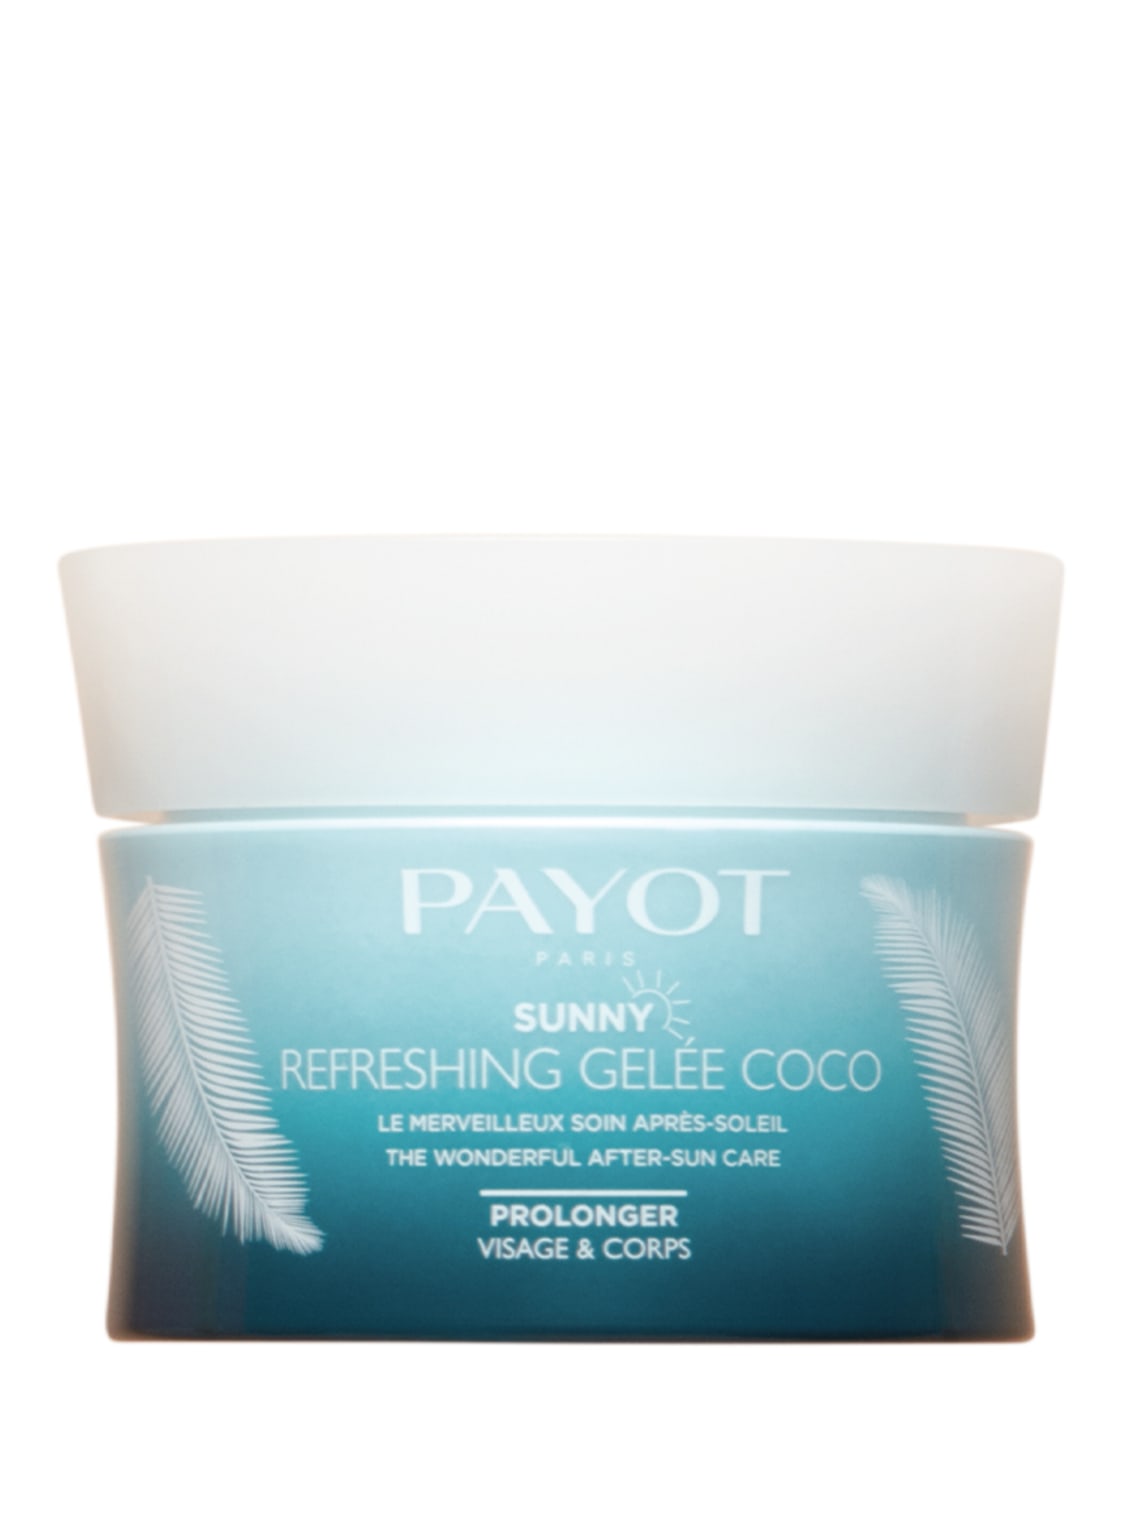 Image of Payot Sunny Refreshing Gelée Coco 200 ml